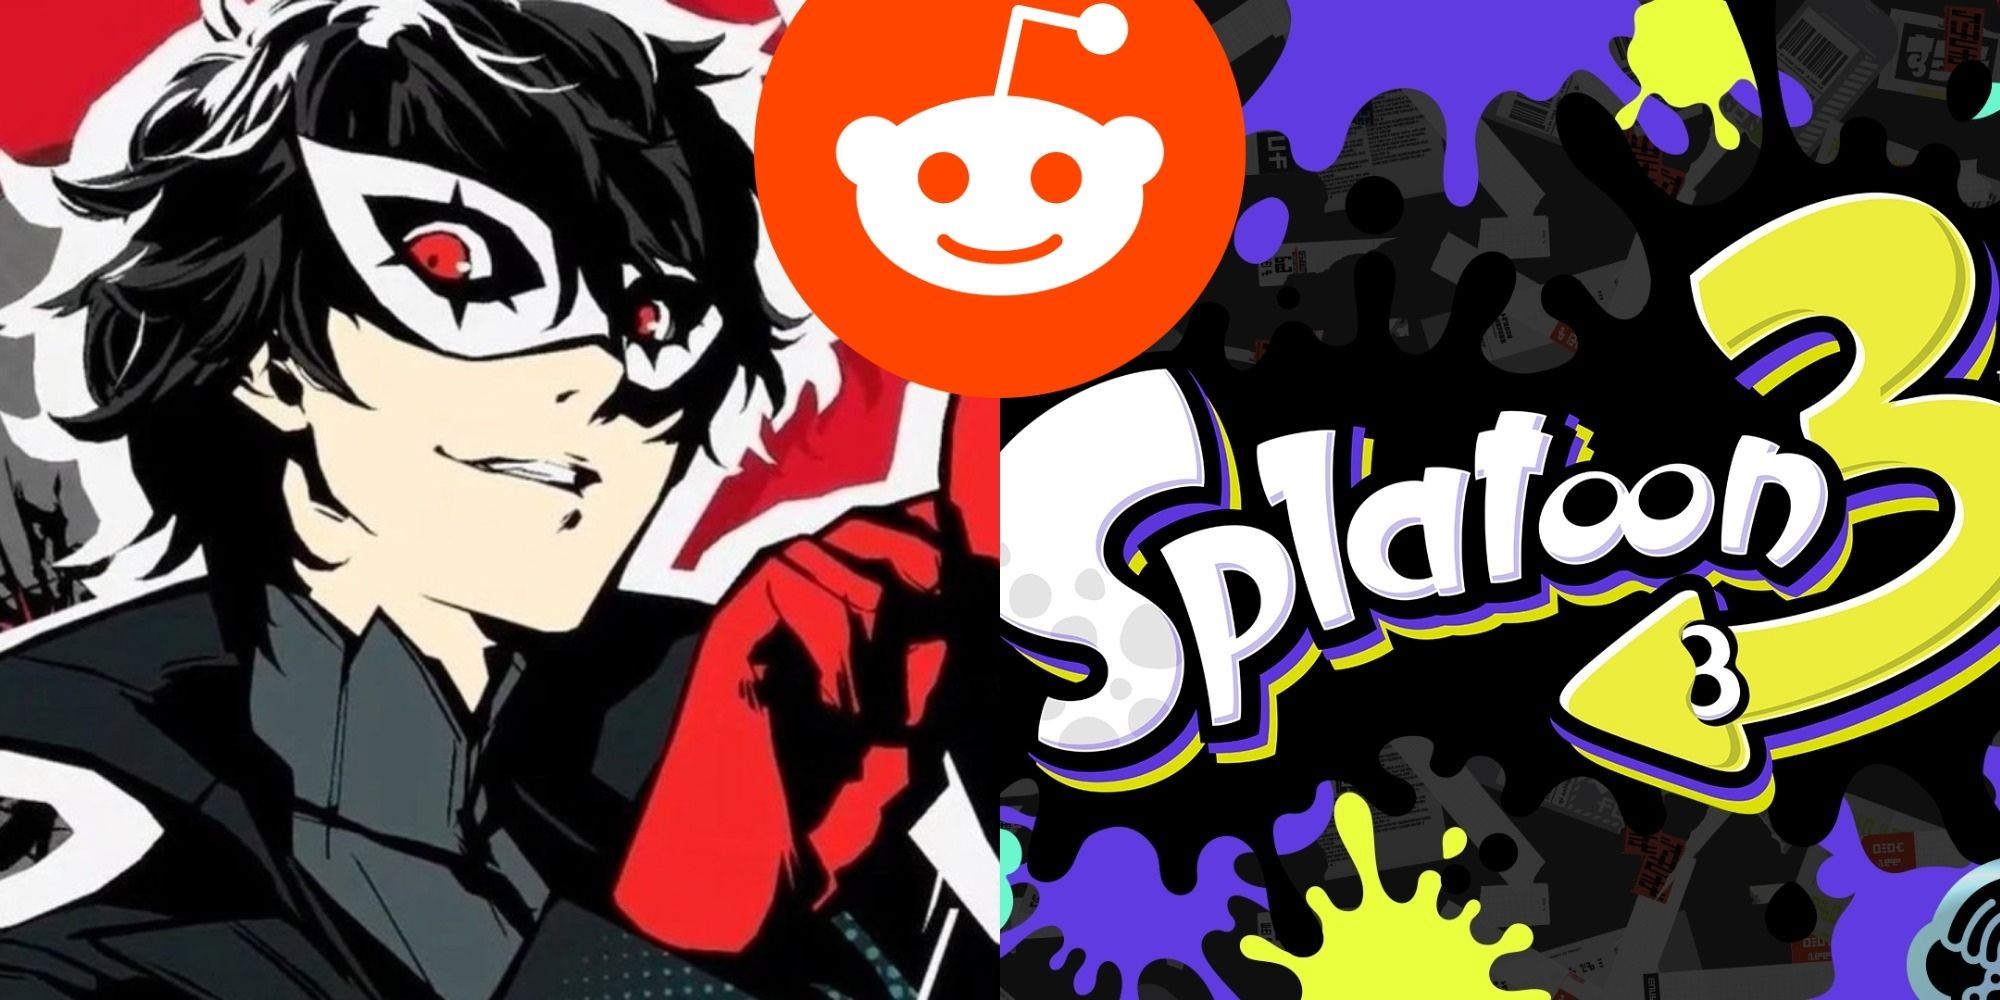 Split image showing Joker from Persona and the logo from Splatoon 3, and the Reddit logo